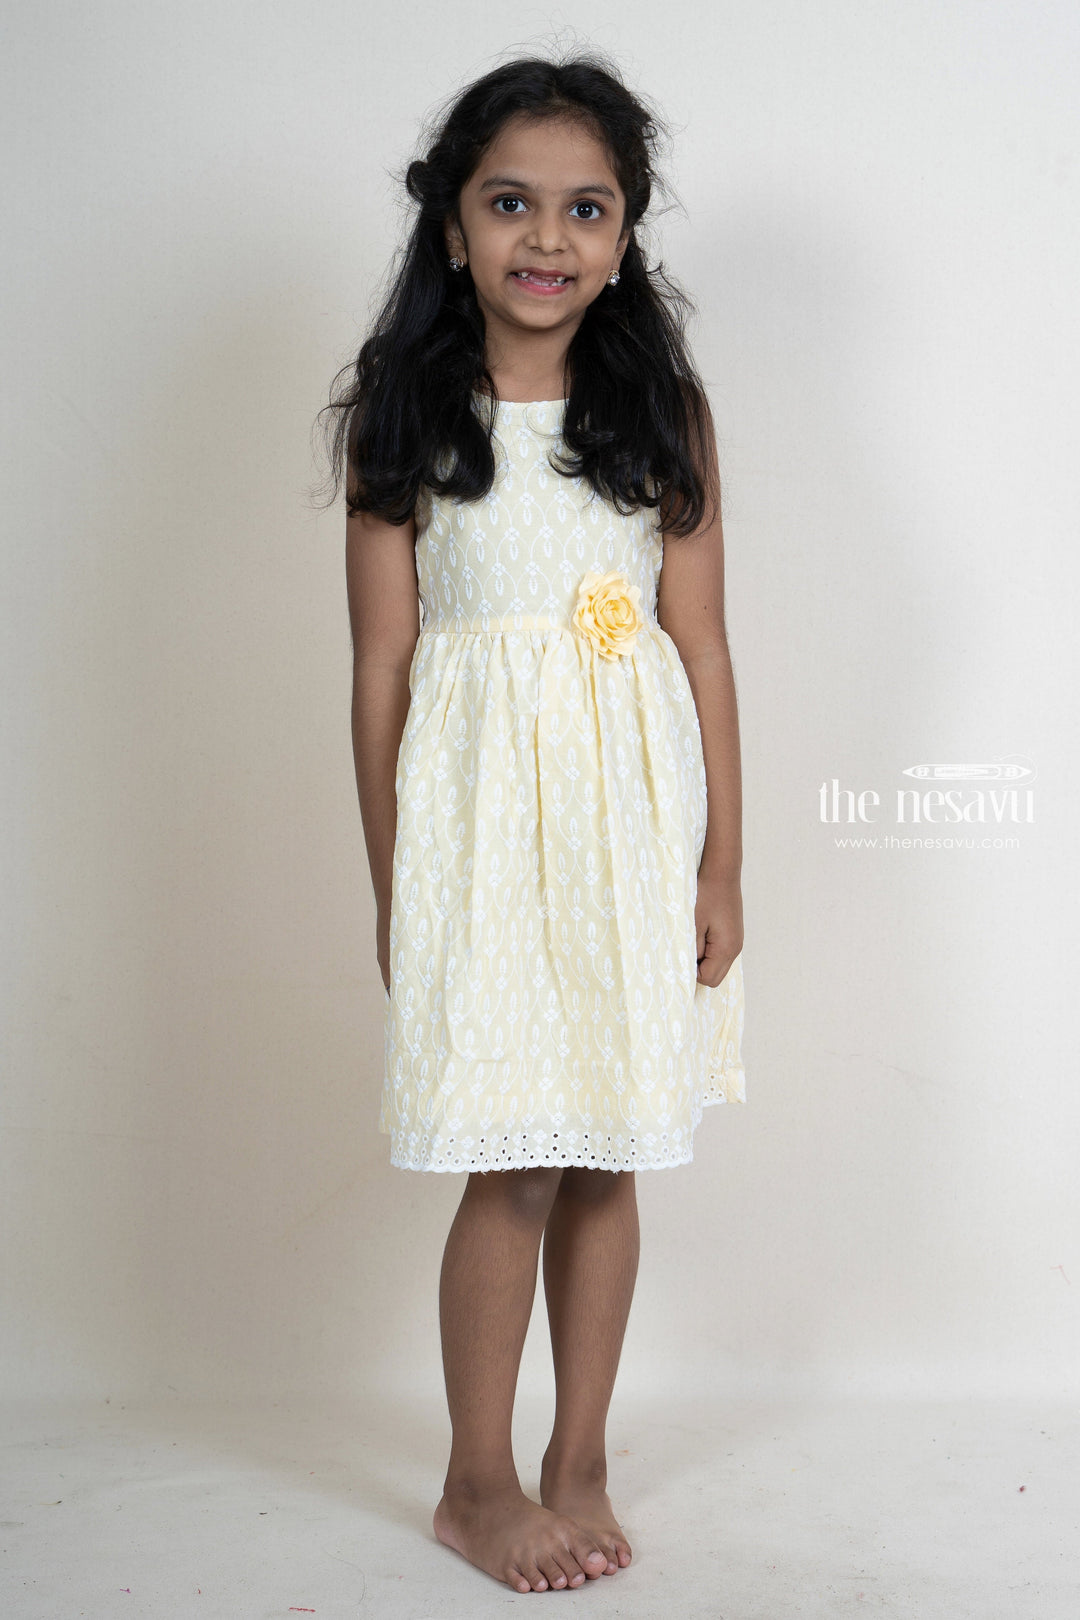 The Nesavu Frocks & Dresses Light Yellow Embroidery Cotton Gown With Flower Embellishment For Girls psr silks Nesavu 18 (2Y) / Ivory GFC930